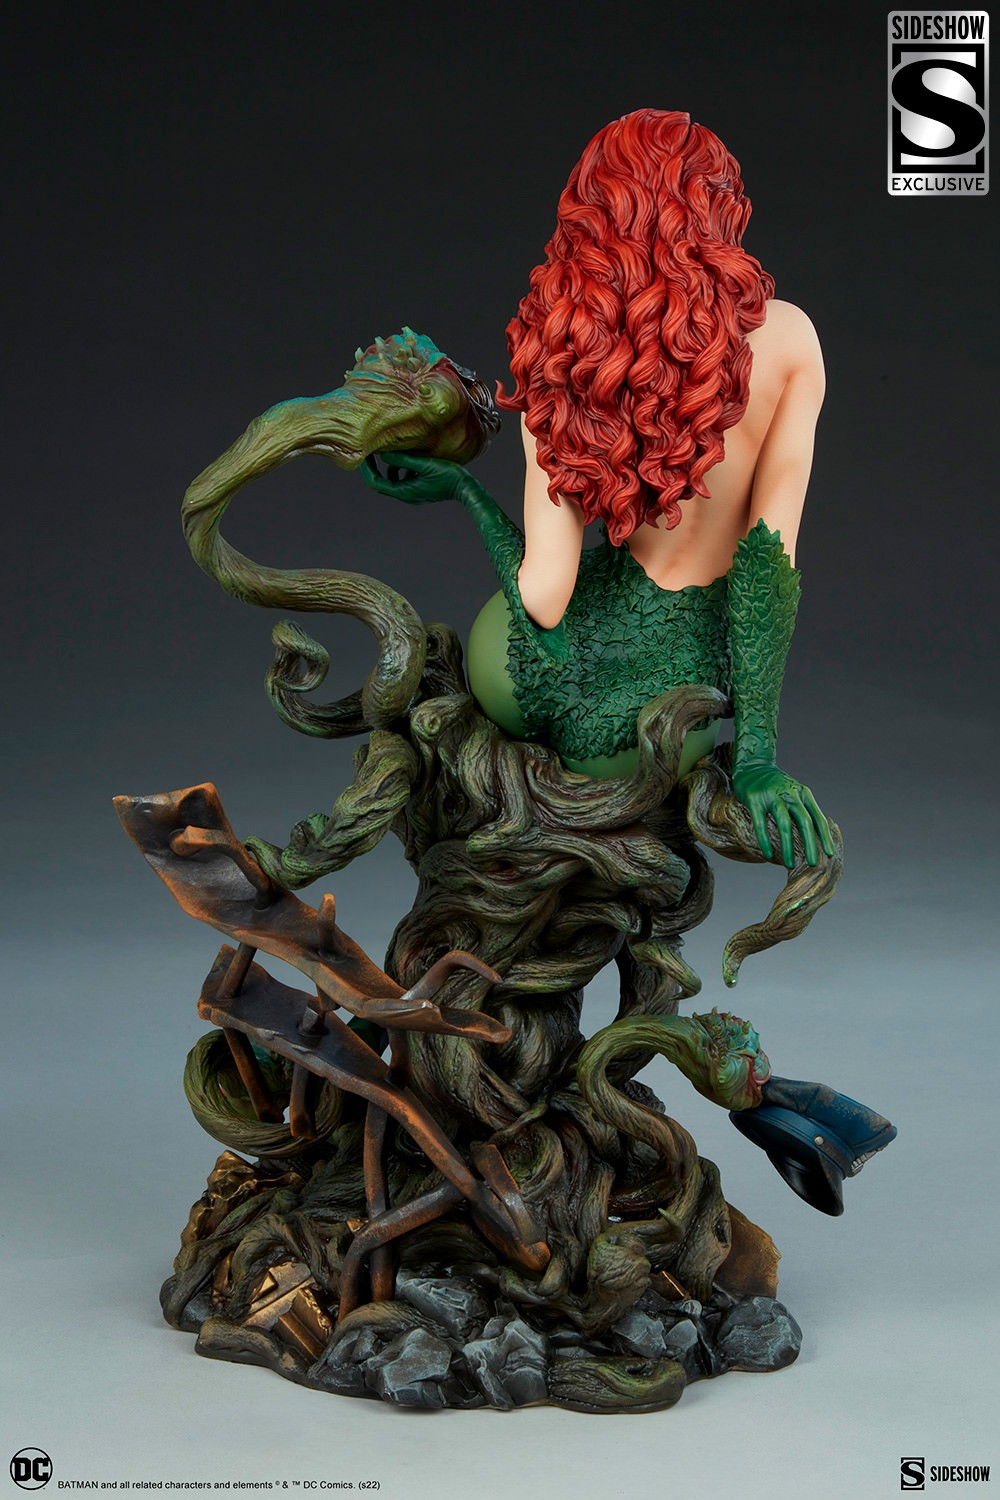 Poison Ivy Exclusive Edition (Prototype Shown) View 10